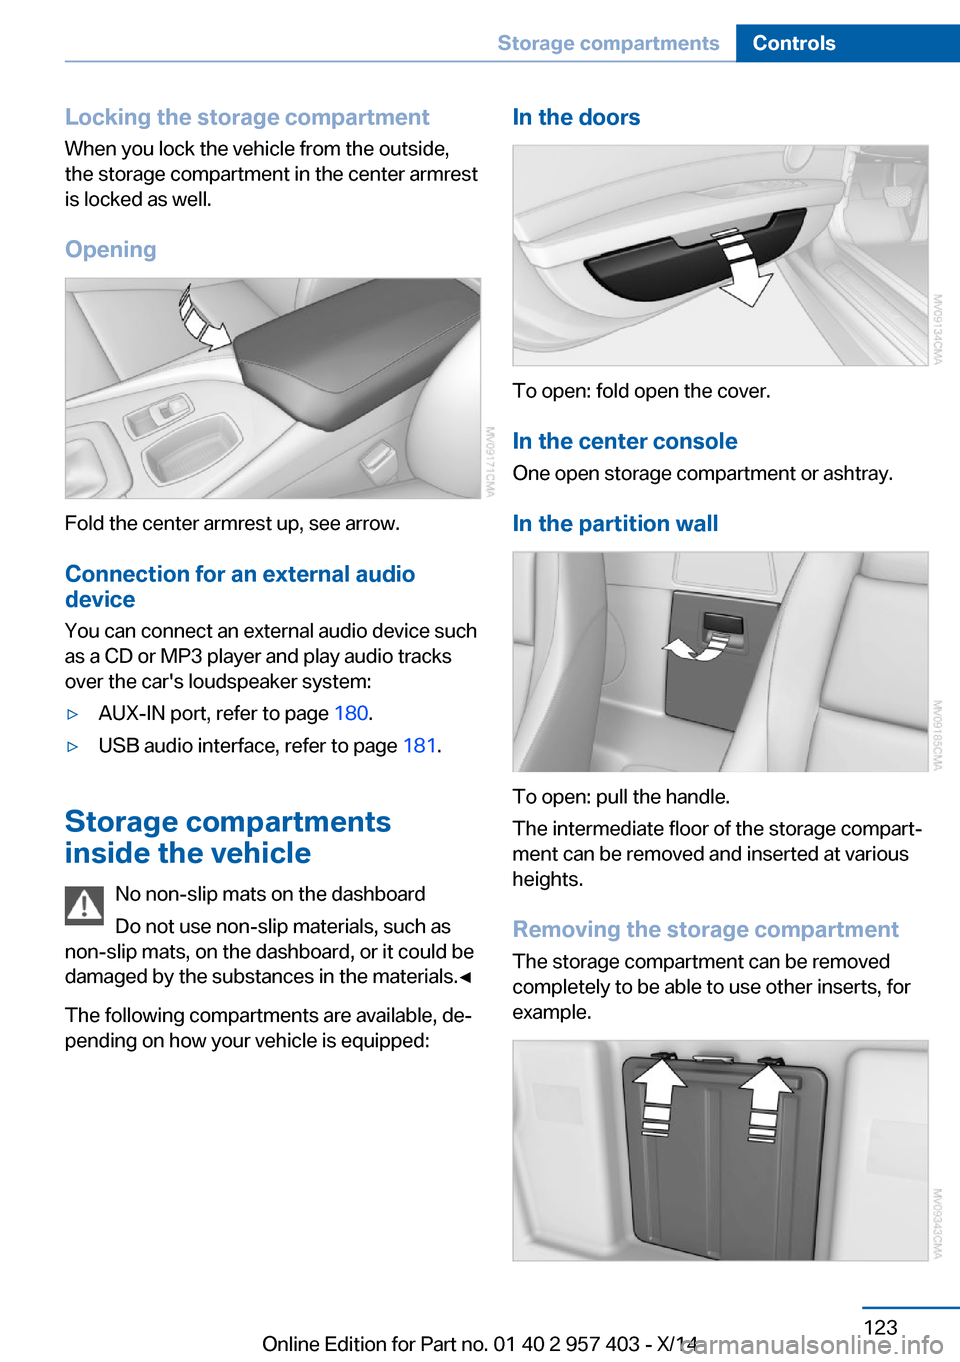 BMW Z4 2016 E89 Owners Manual Locking the storage compartment
When you lock the vehicle from the outside,
the storage compartment in the center armrest
is locked as well.
Opening
Fold the center armrest up, see arrow.Connection fo